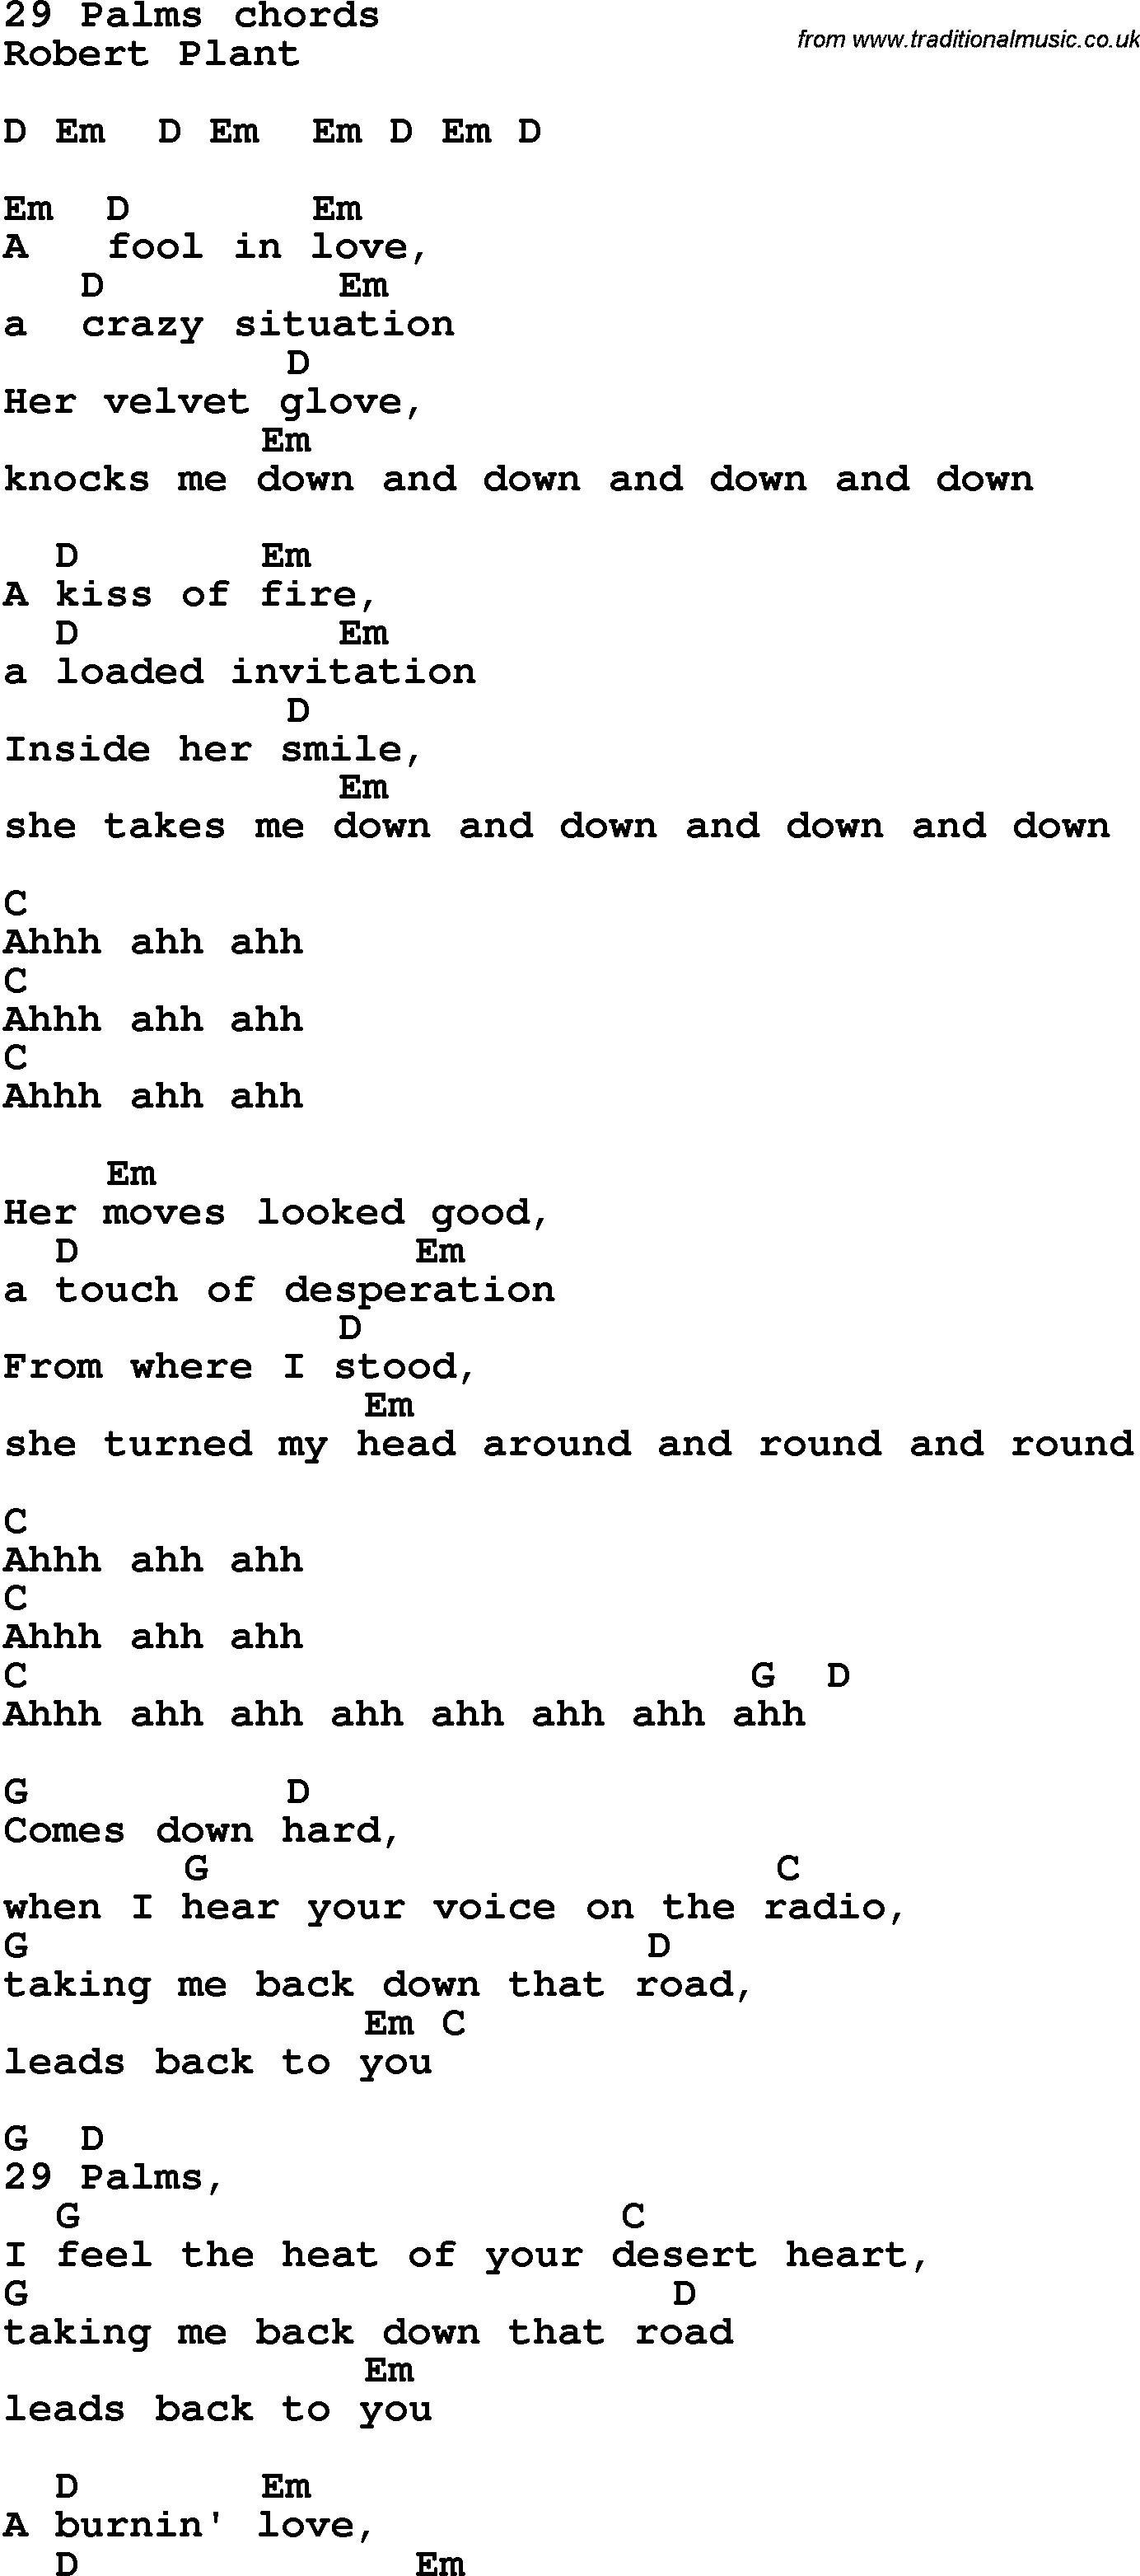 Song Lyrics with guitar chords for 29 Palms